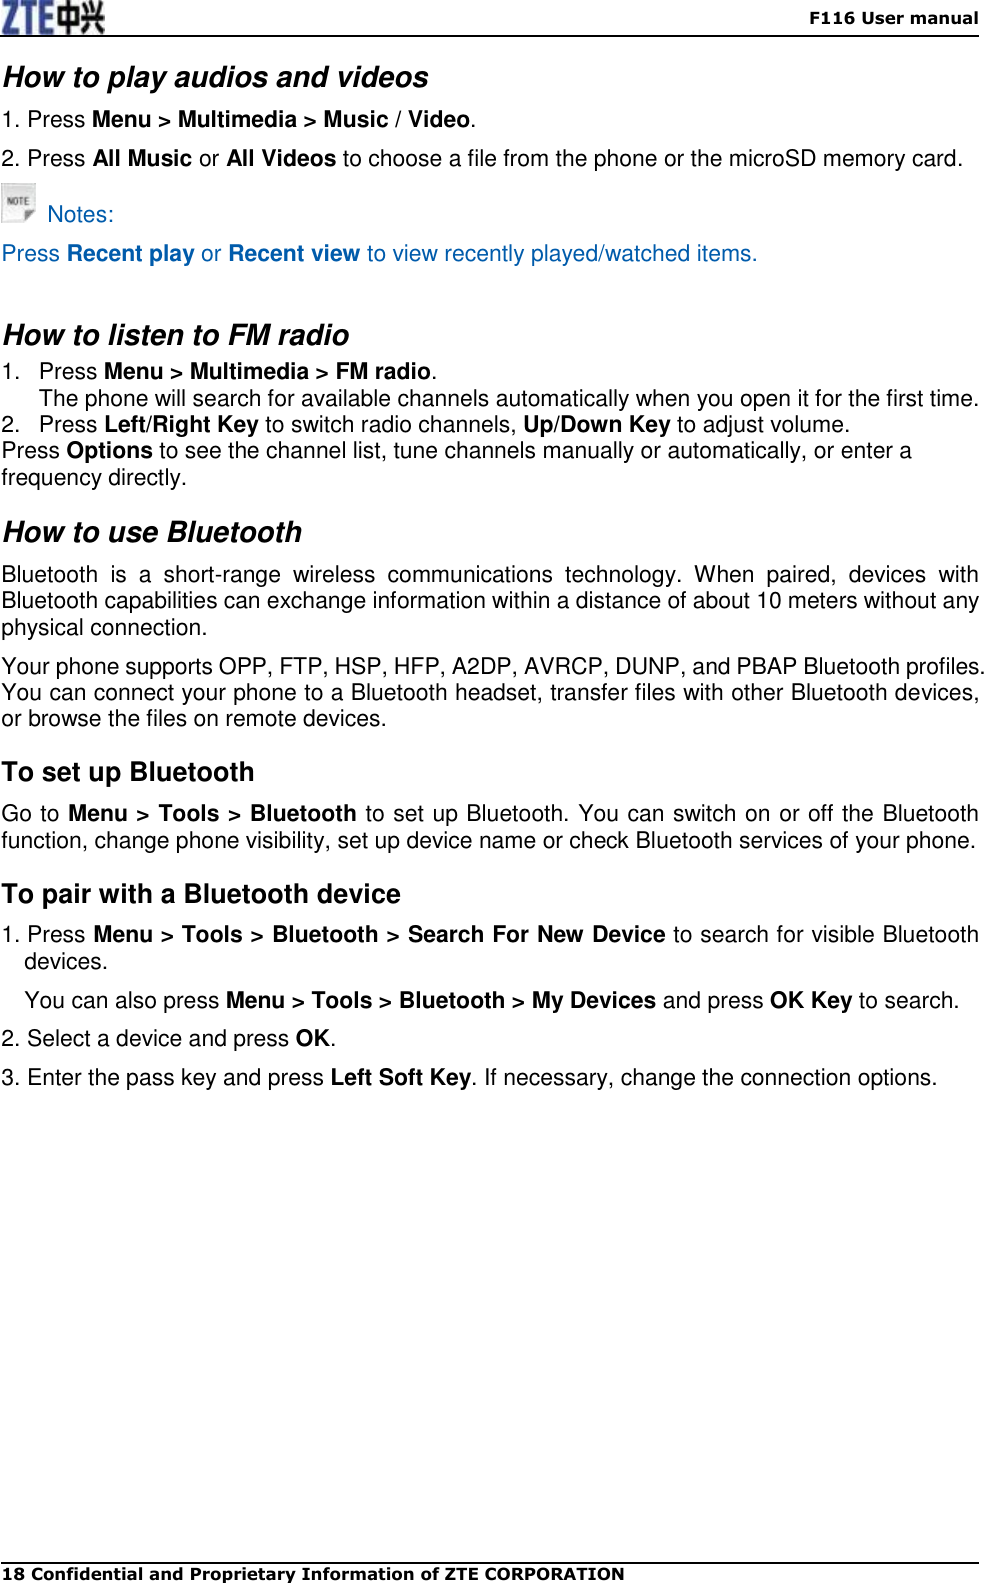    F116 User manual 18 Confidential and Proprietary Information of ZTE CORPORATION How to play audios and videos 1. Press Menu &gt; Multimedia &gt; Music / Video. 2. Press All Music or All Videos to choose a file from the phone or the microSD memory card.   Notes: Press Recent play or Recent view to view recently played/watched items.  How to listen to FM radio 1.  Press Menu &gt; Multimedia &gt; FM radio.   The phone will search for available channels automatically when you open it for the first time. 2.  Press Left/Right Key to switch radio channels, Up/Down Key to adjust volume. Press Options to see the channel list, tune channels manually or automatically, or enter a frequency directly. How to use Bluetooth Bluetooth  is  a  short-range  wireless  communications  technology.  When  paired,  devices  with Bluetooth capabilities can exchange information within a distance of about 10 meters without any physical connection. Your phone supports OPP, FTP, HSP, HFP, A2DP, AVRCP, DUNP, and PBAP Bluetooth profiles. You can connect your phone to a Bluetooth headset, transfer files with other Bluetooth devices, or browse the files on remote devices. To set up Bluetooth Go to Menu &gt; Tools &gt; Bluetooth to set up Bluetooth. You can switch on or off the Bluetooth function, change phone visibility, set up device name or check Bluetooth services of your phone.   To pair with a Bluetooth device 1. Press Menu &gt; Tools &gt; Bluetooth &gt; Search For New Device to search for visible Bluetooth devices. You can also press Menu &gt; Tools &gt; Bluetooth &gt; My Devices and press OK Key to search. 2. Select a device and press OK. 3. Enter the pass key and press Left Soft Key. If necessary, change the connection options.   